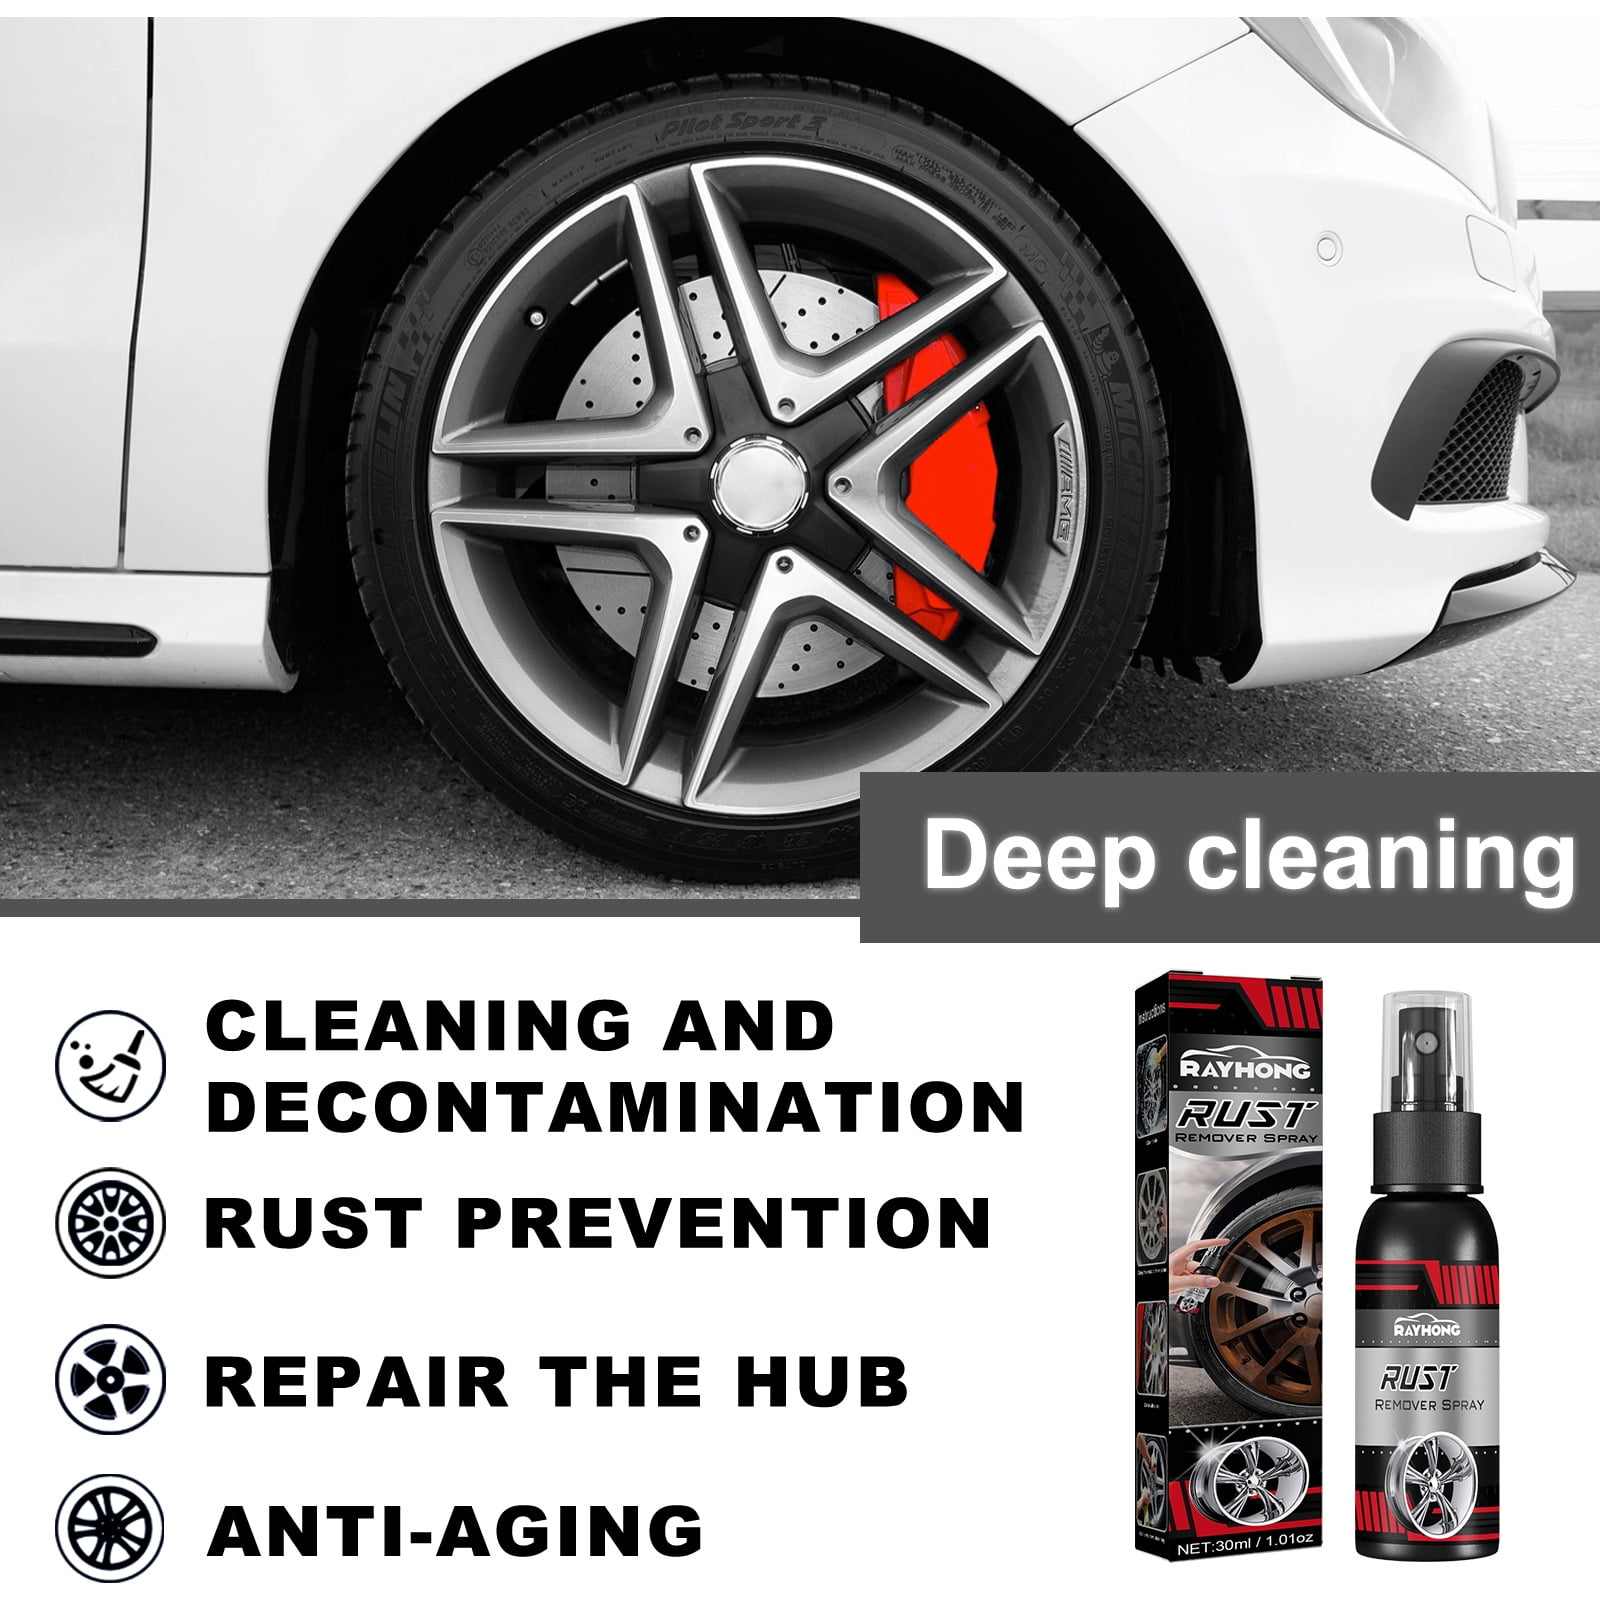 Rim And Tire Cleaner Rinse-Free Rust Removal Converter For Aluminum Rims  Wheel Hub Descaling Car Cleaning Supplies For Vehicles - AliExpress